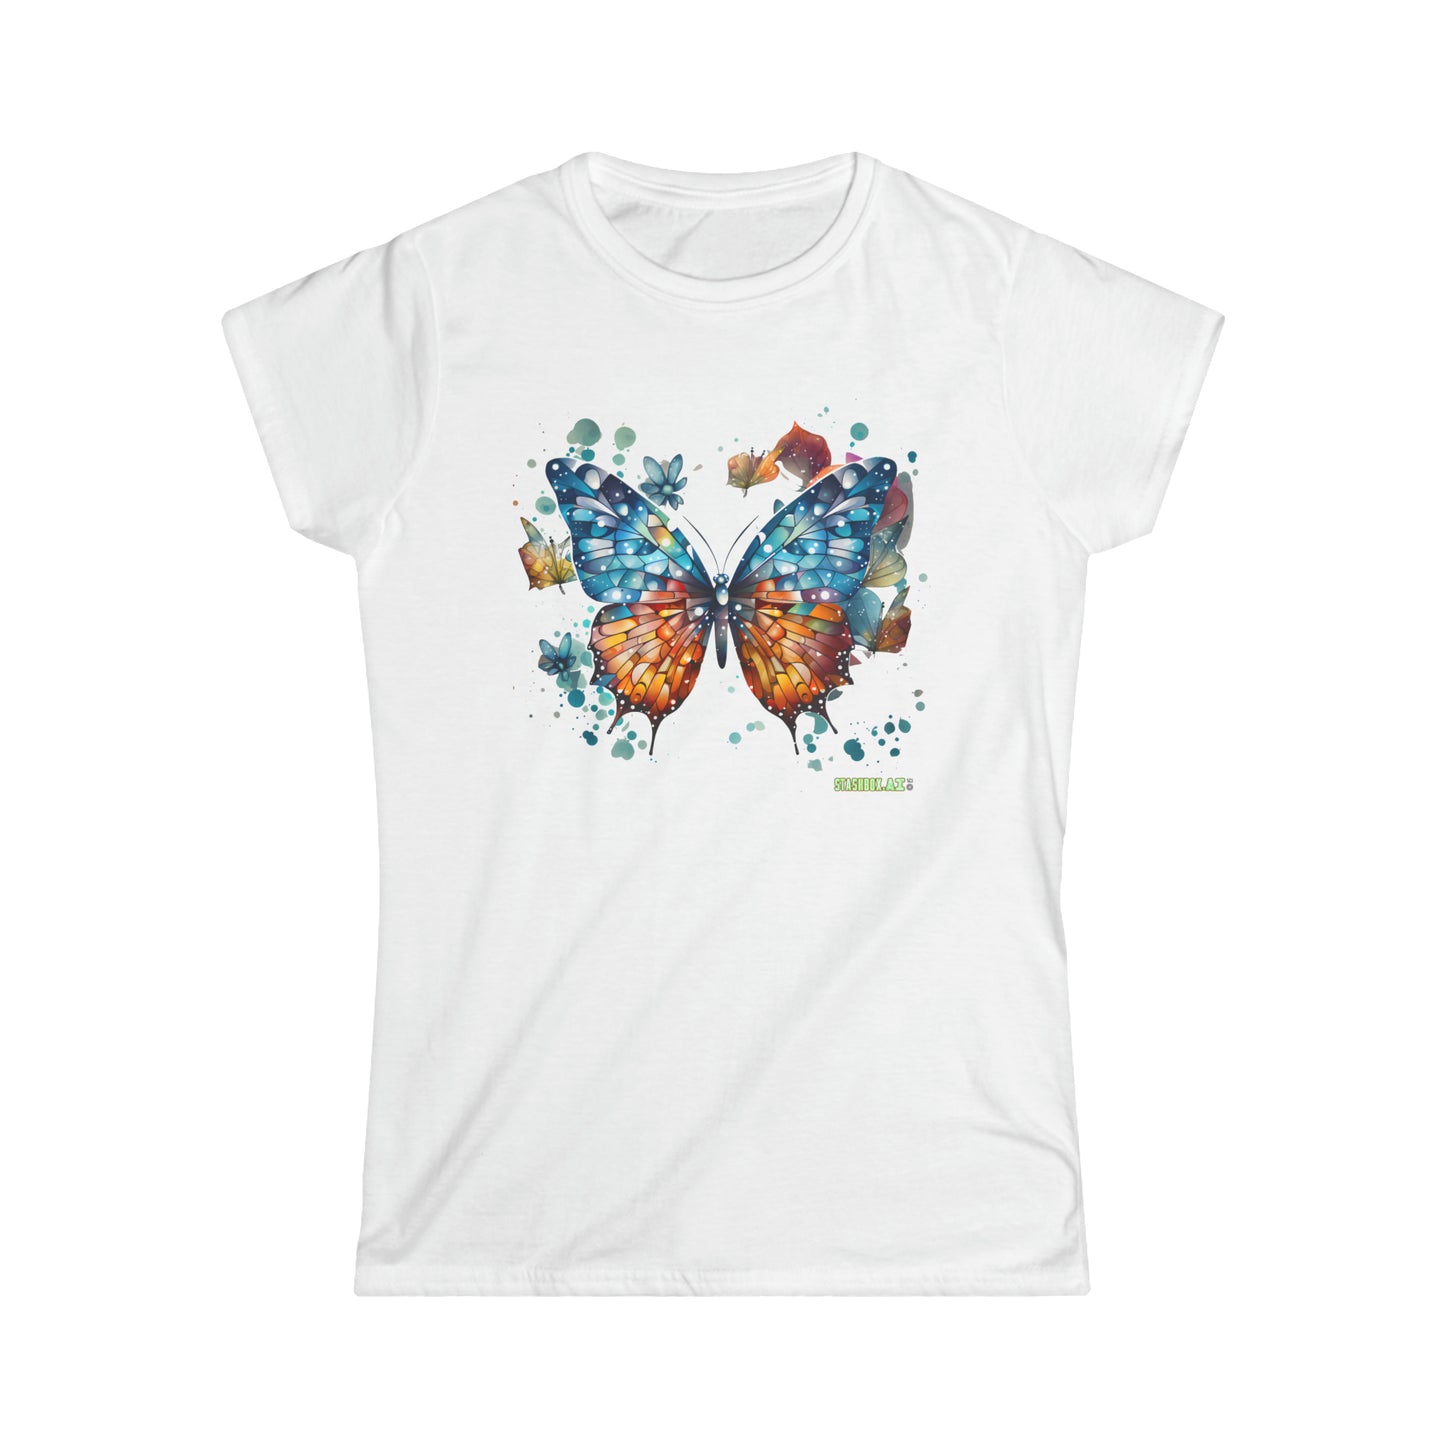 Women's Softstyle Tee - Colorful Geometric Butterfly 004